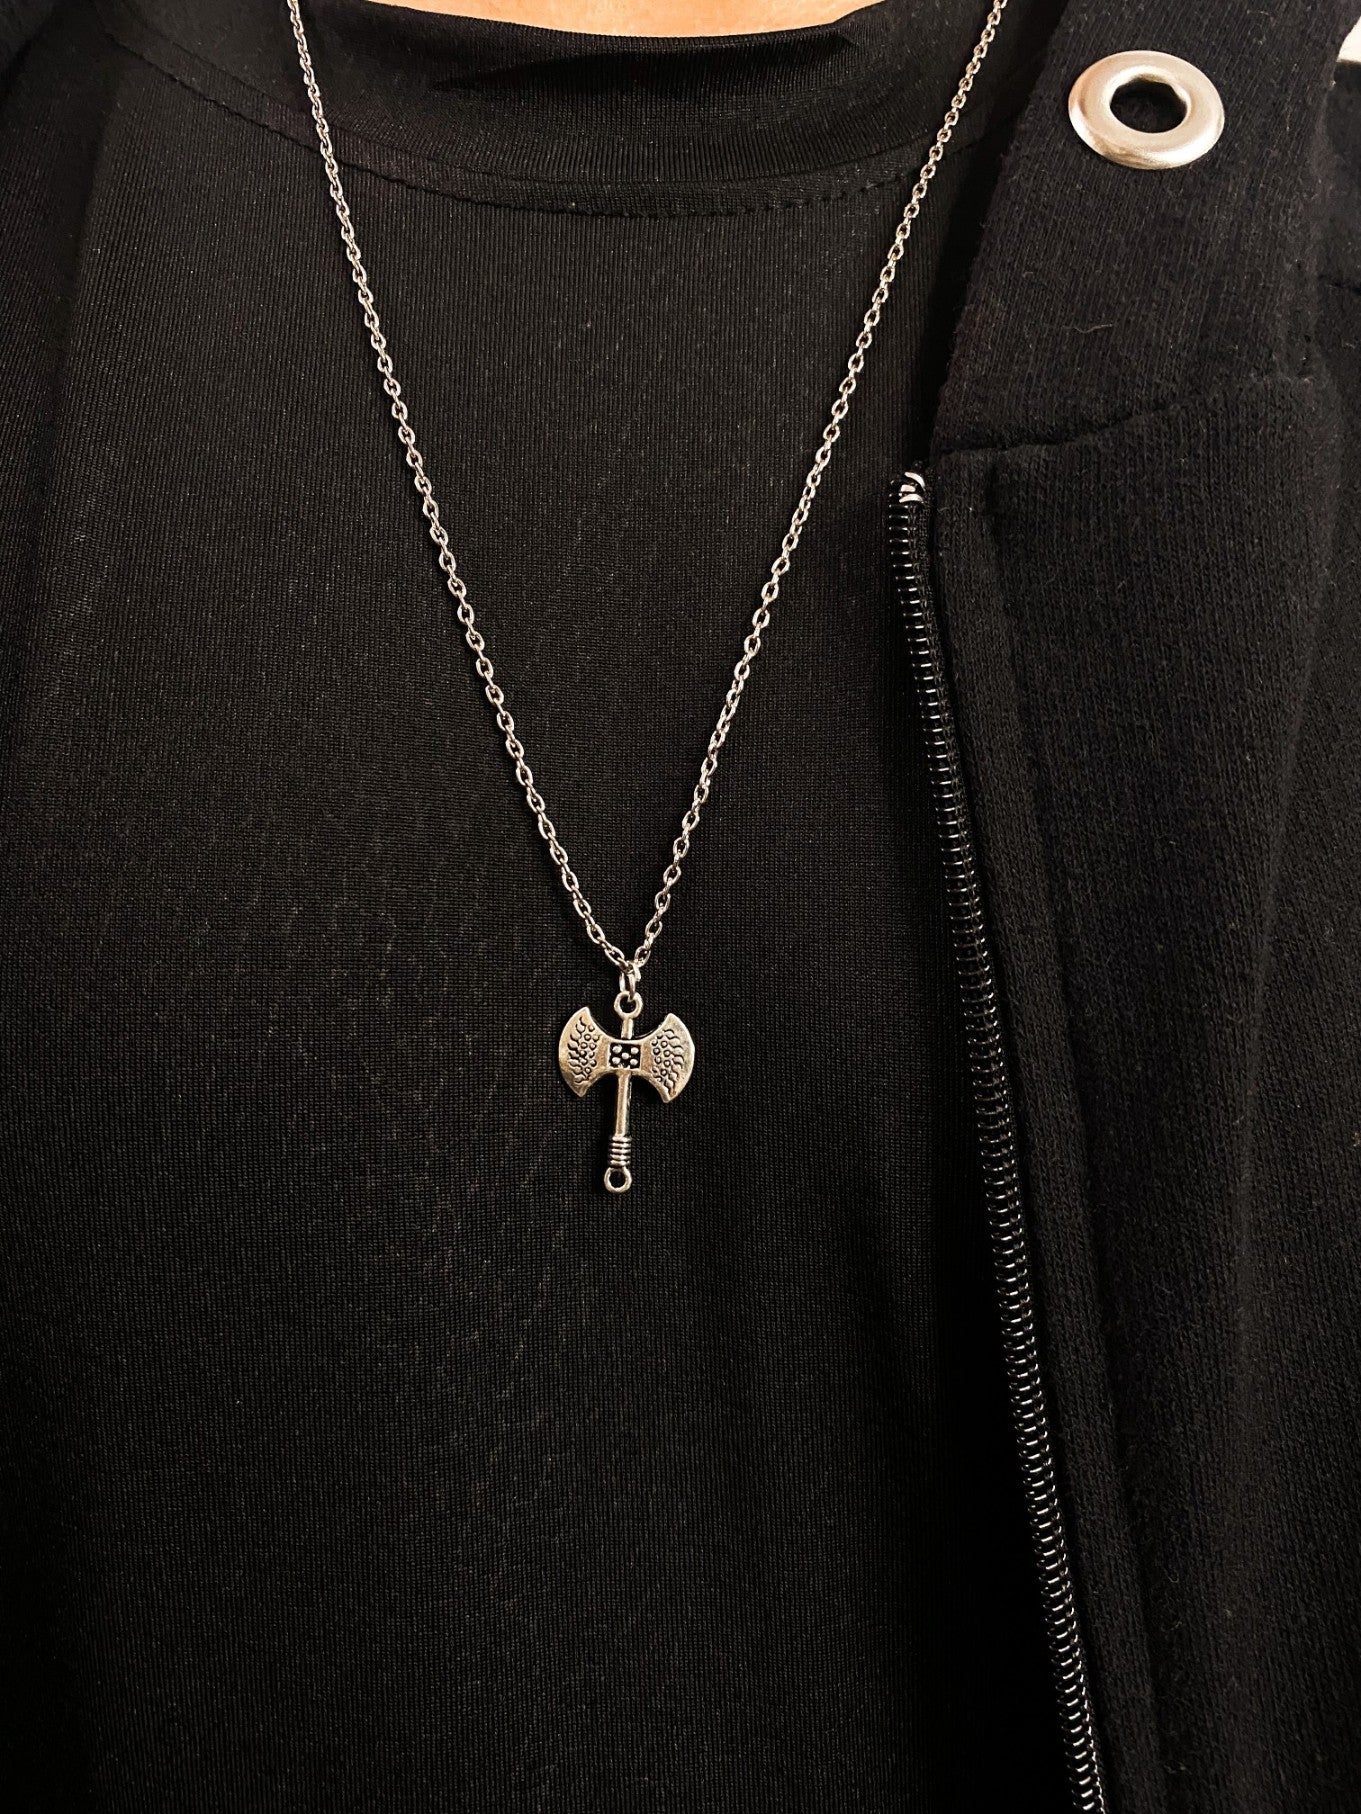 Double Headed Axe Silver Pendant With Chain